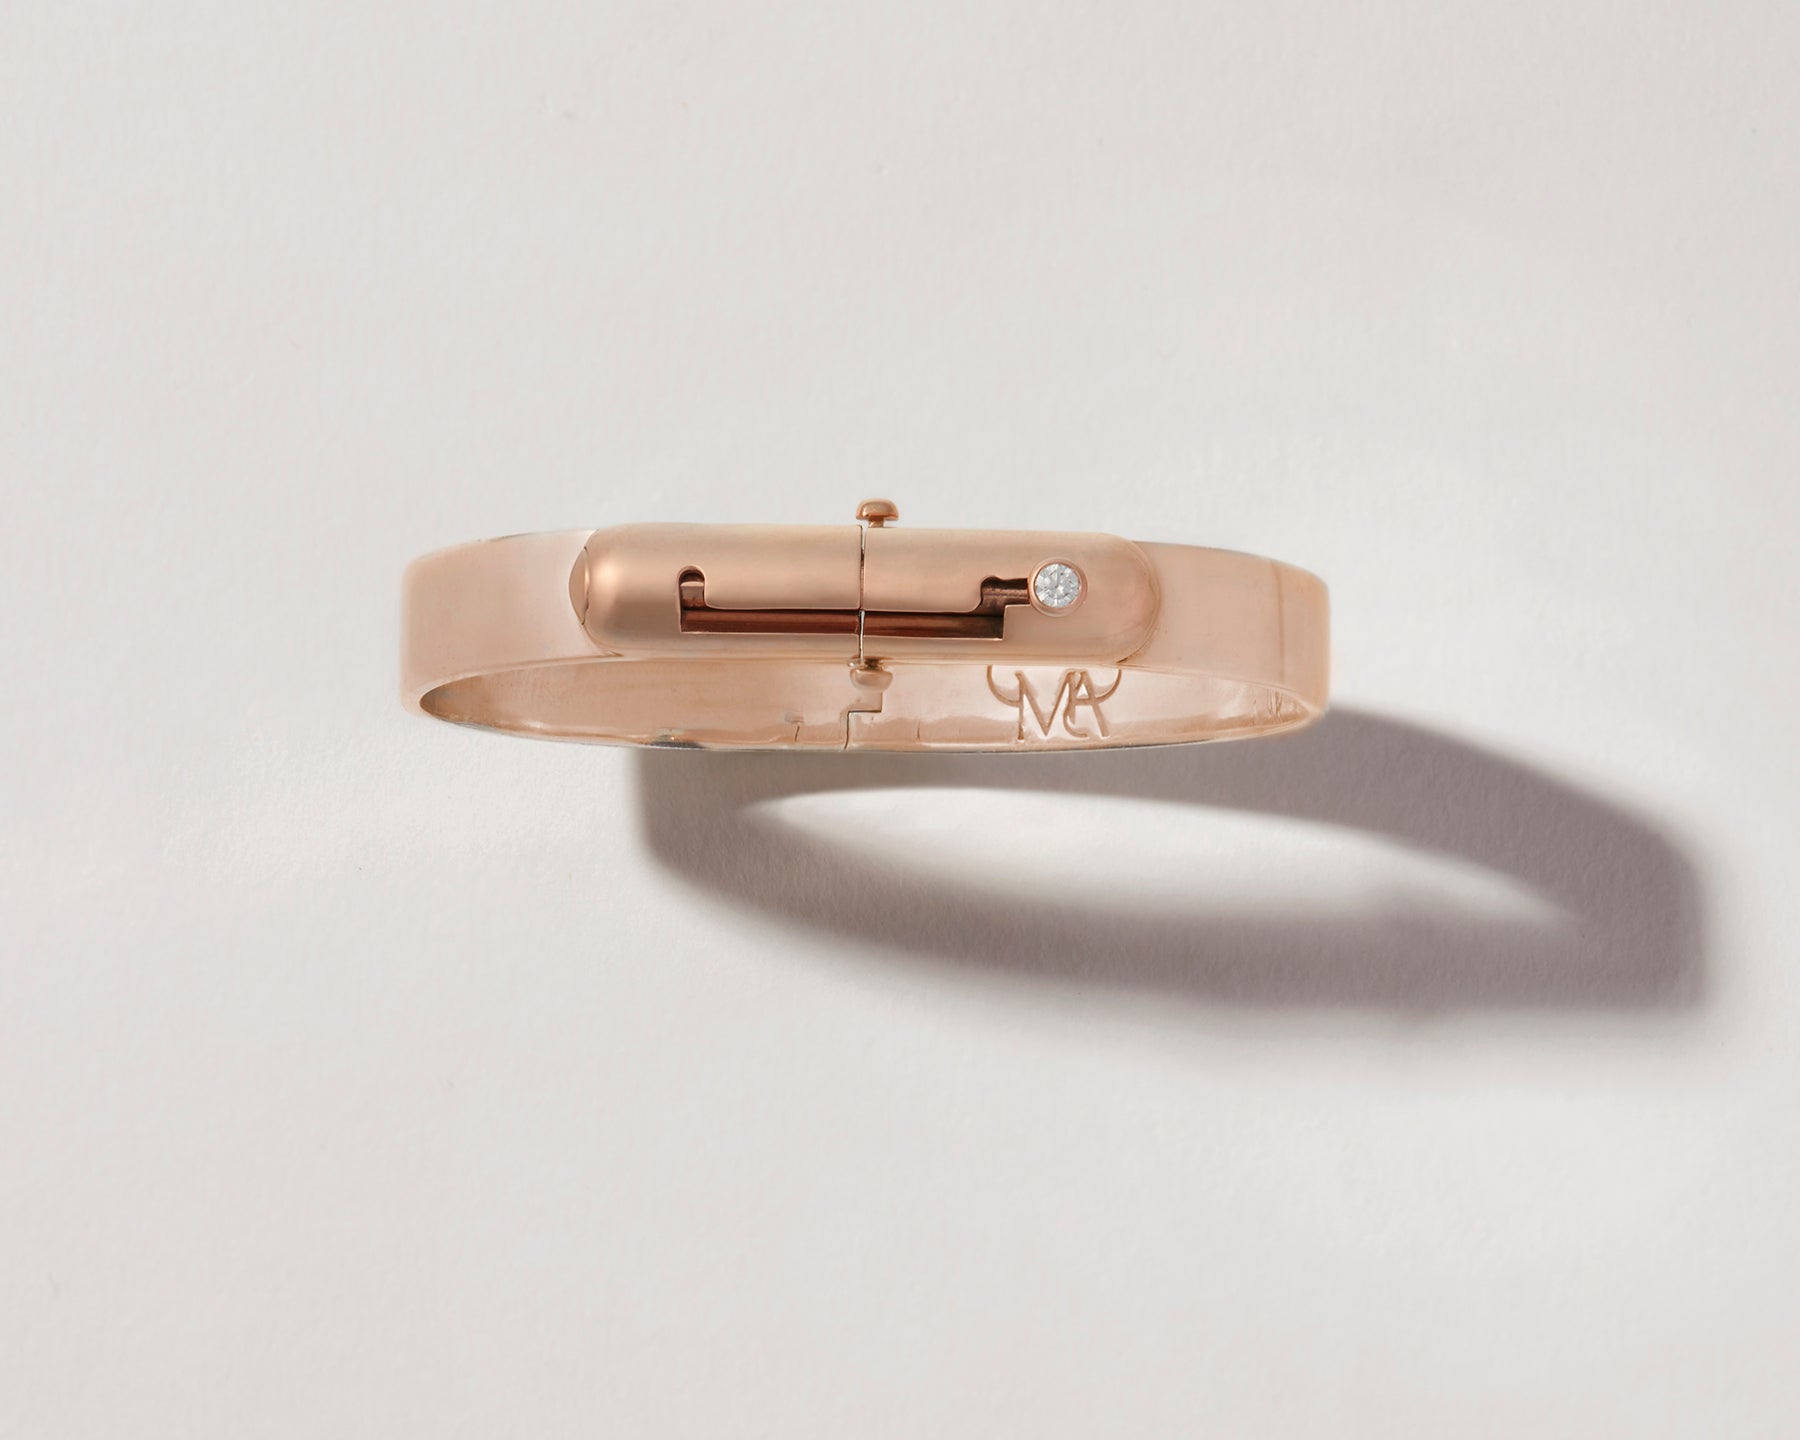 Overhead shot of rose gold bracelet with clasp against white backdrop